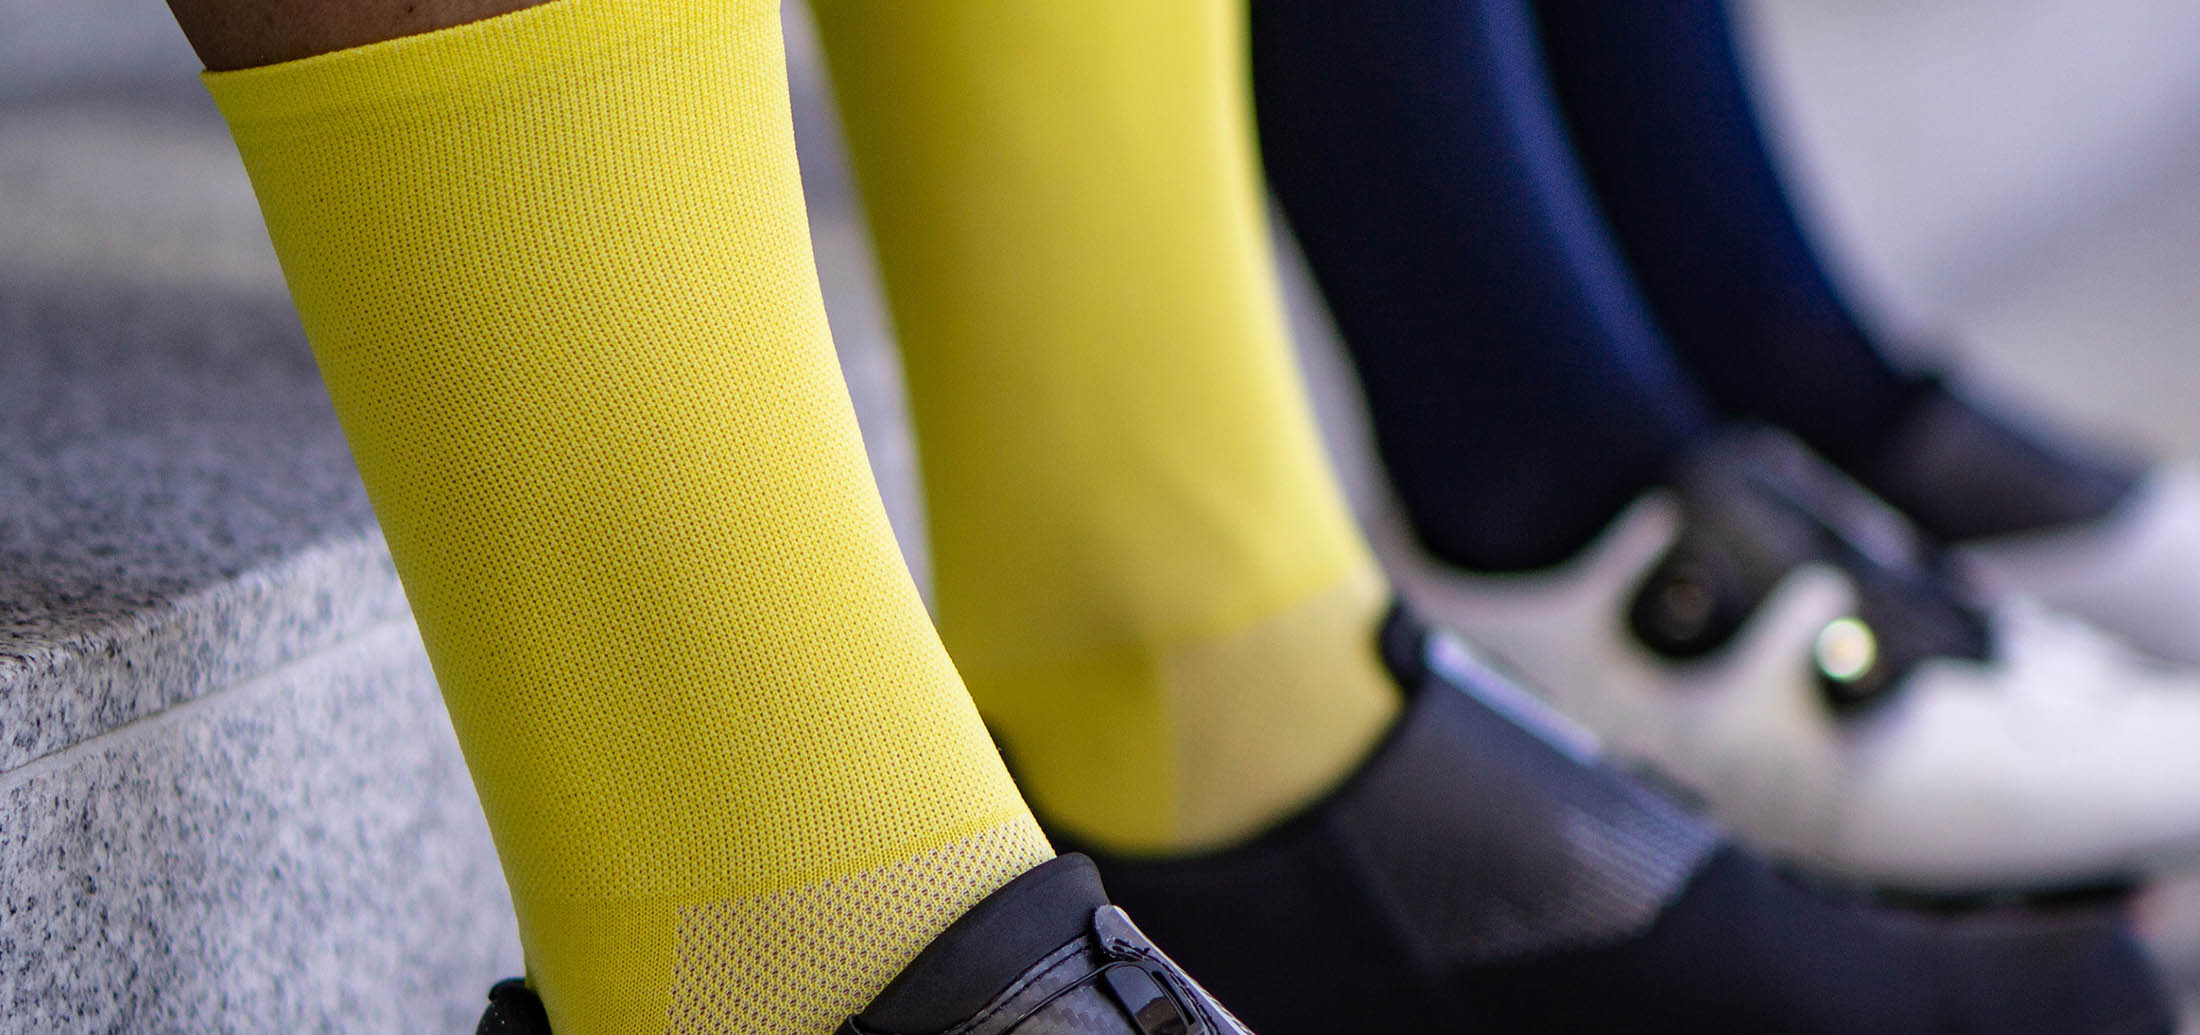 all yellow socks for road male and female cyclists. Made from eco-friendly yarns